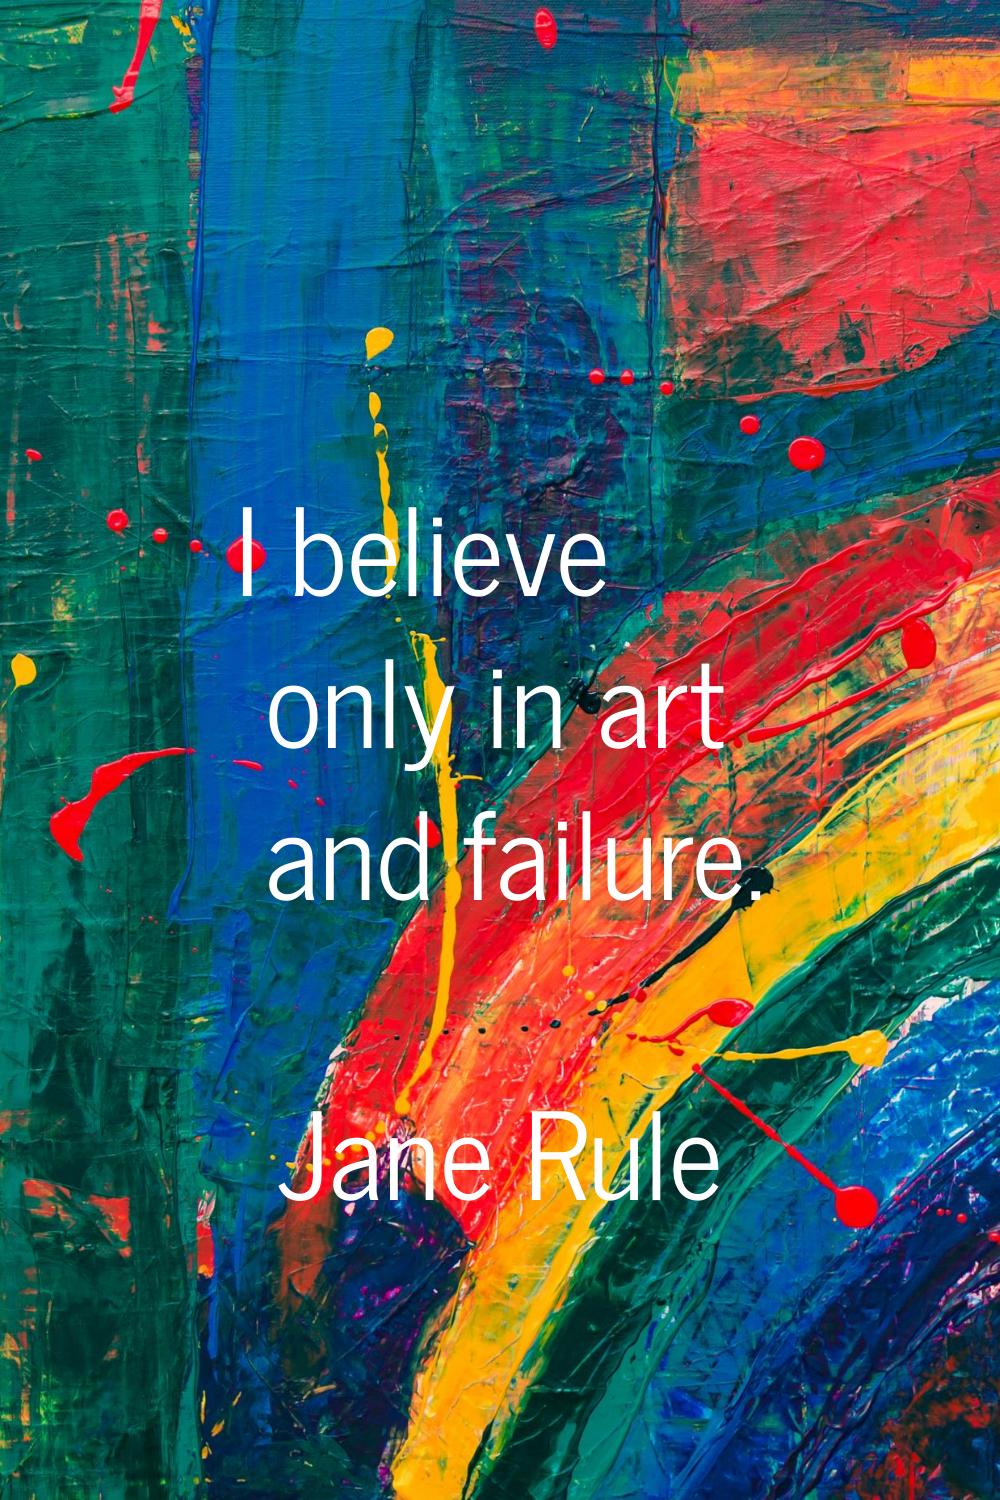 I believe only in art and failure.